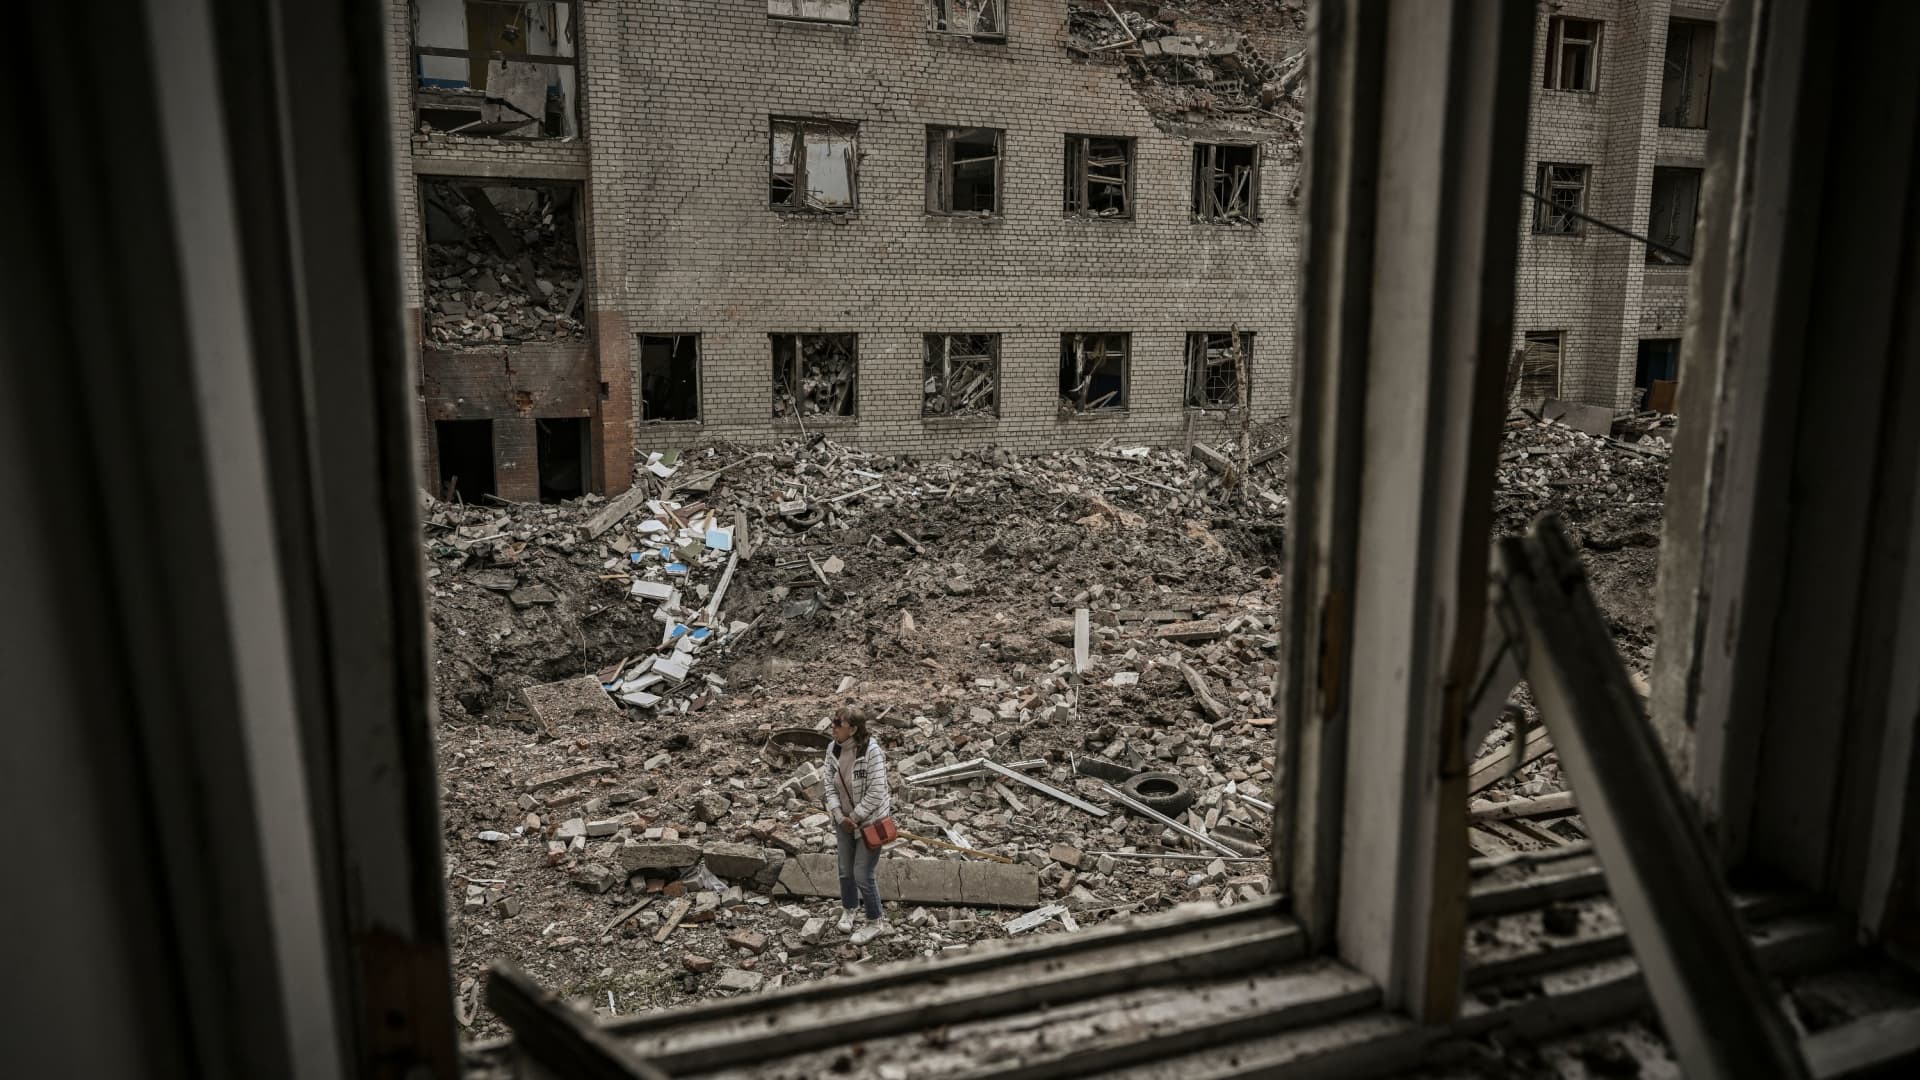 A woman stands in front of a destroyed administration building in the city of Bakhmut in the eastern Ukranian region of Donbas, on May 25, 2022.